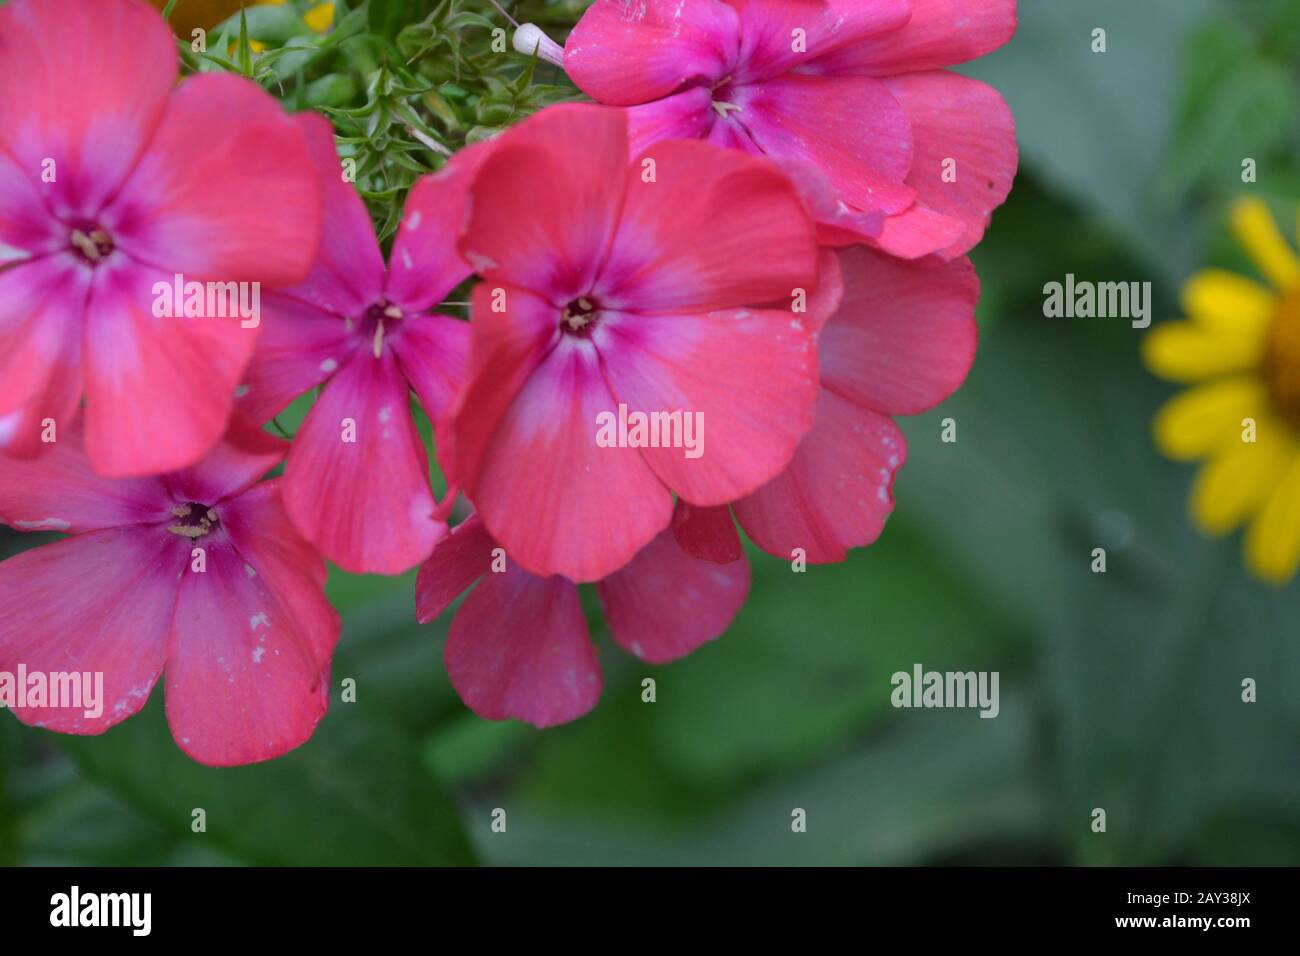 Phlox. Polemoniaceae. Beautiful inflorescence. Flowers pink. Nice smell. Growing flowers. Flowerbed. On blurred background. Close-up. Horizontal Stock Photo